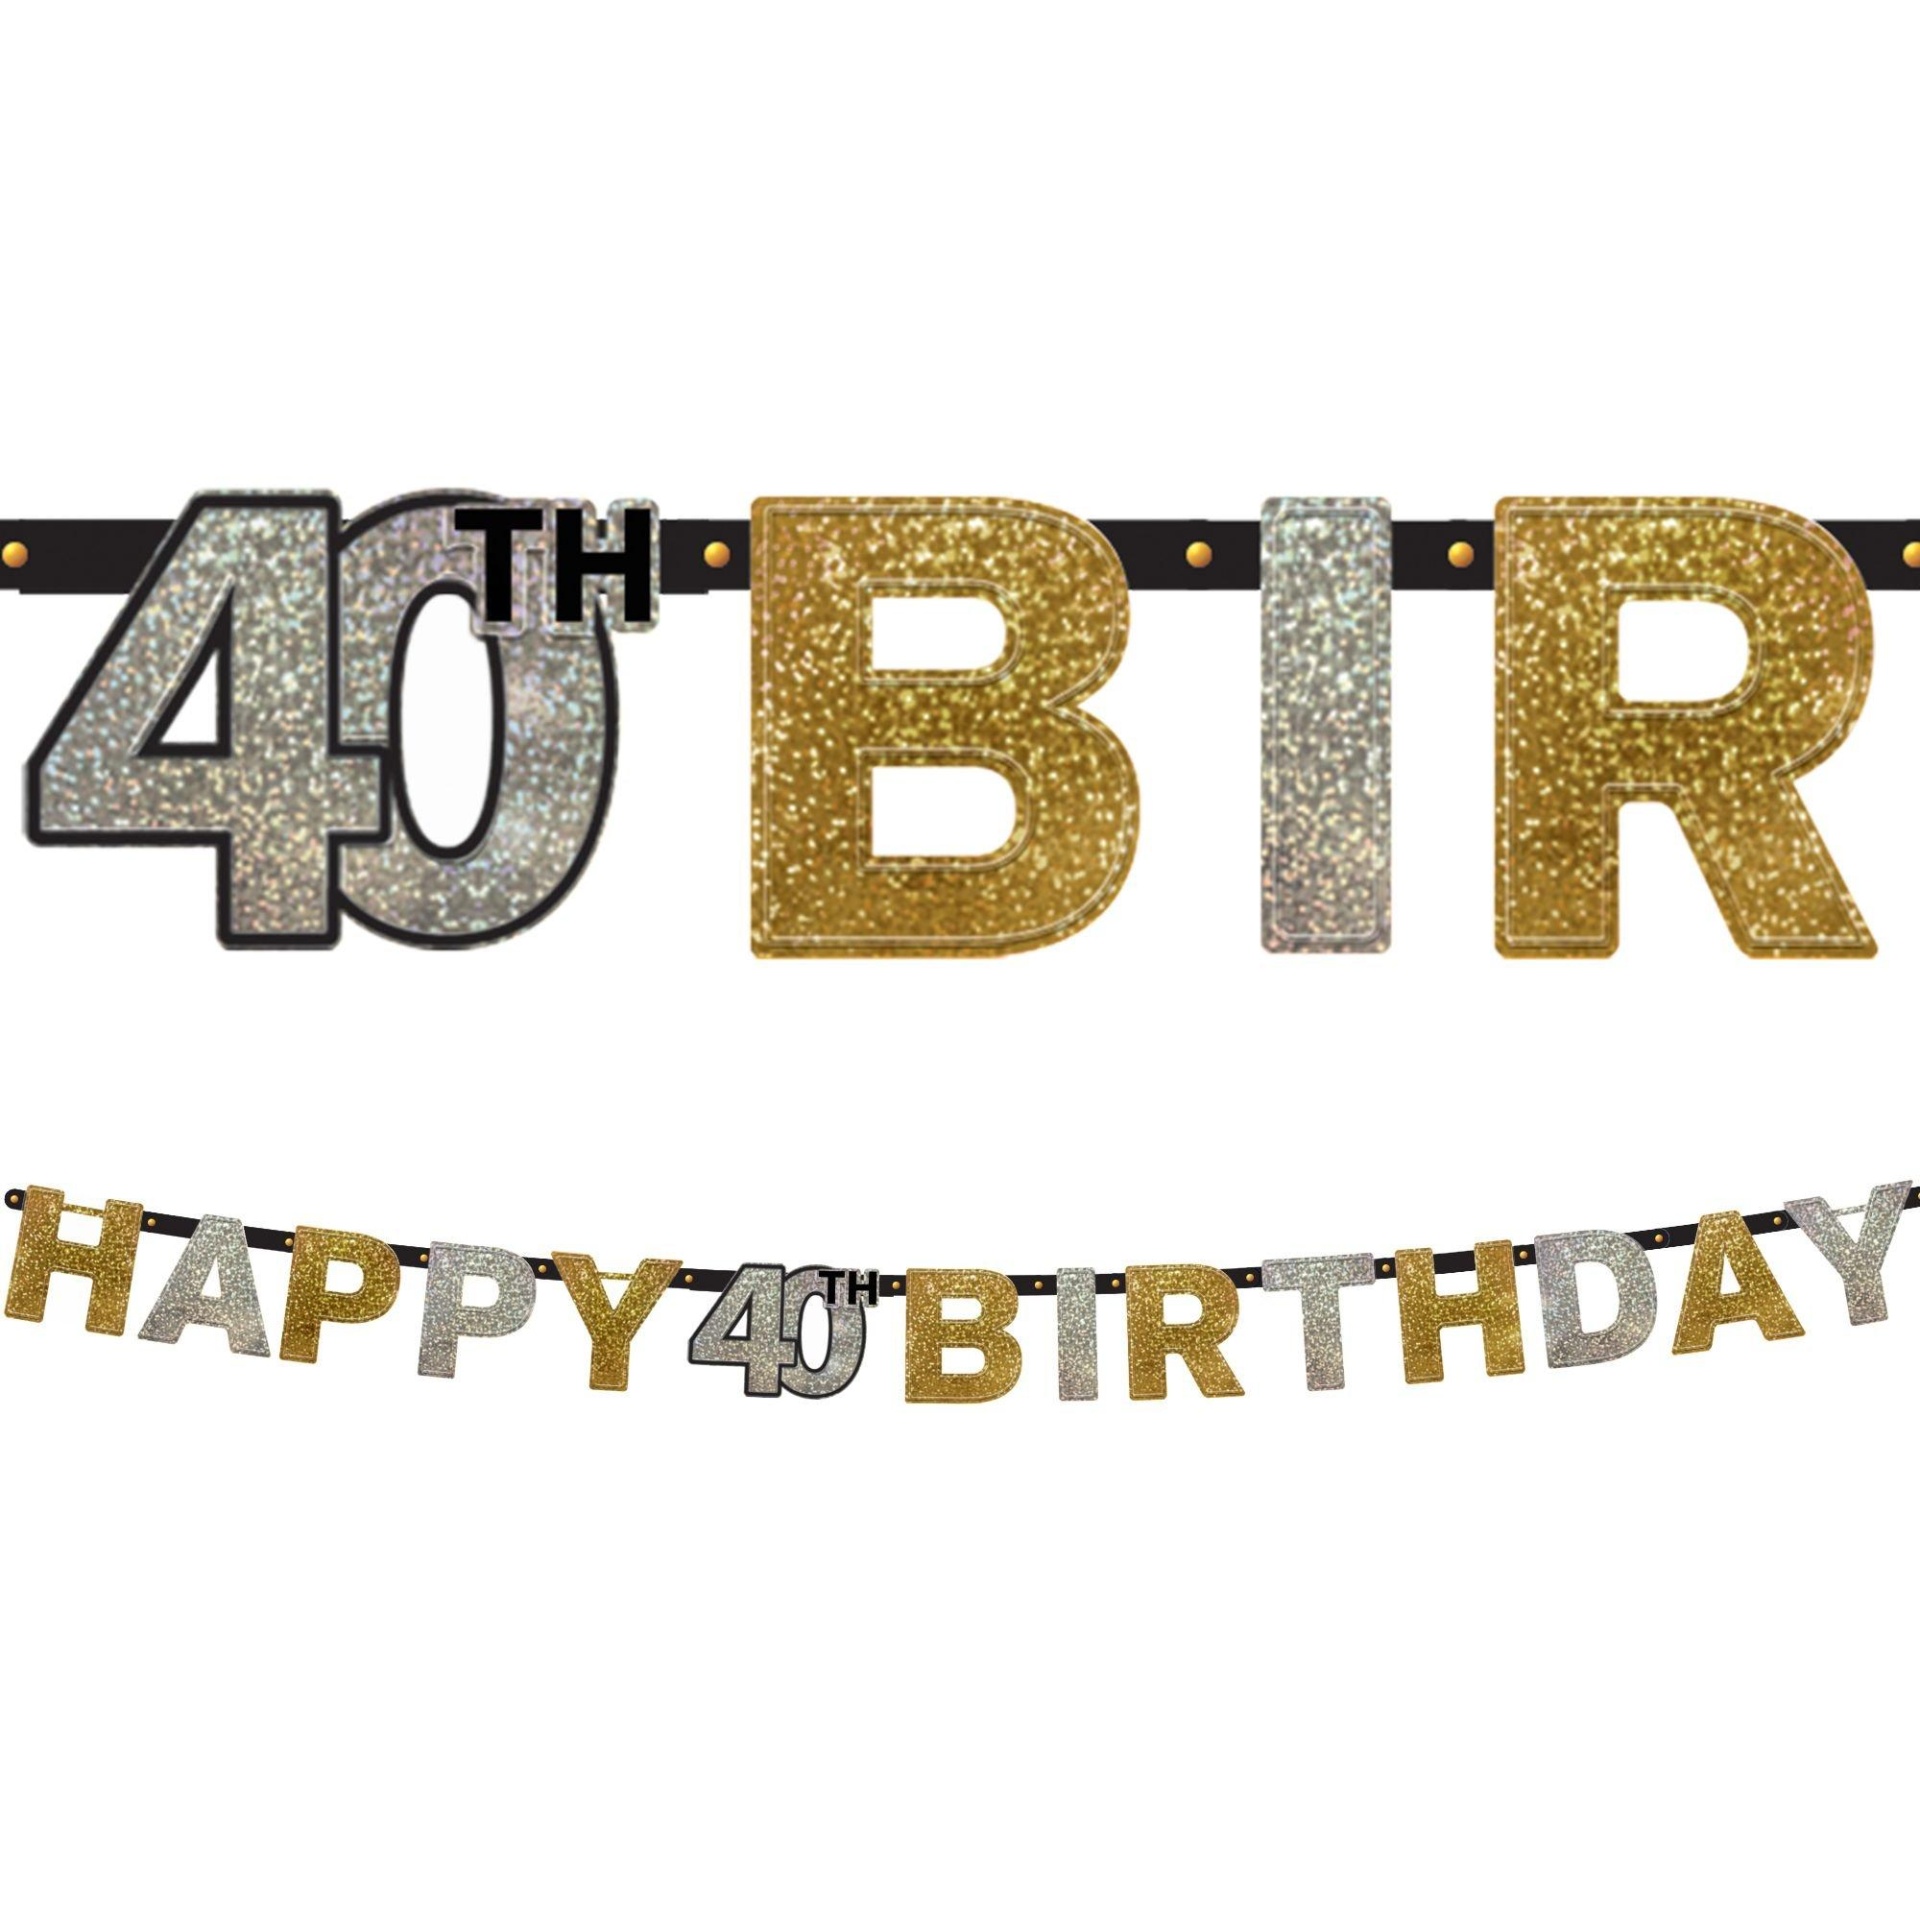 slide 1 of 1, Party City Prismatic 40th Birthday Banner Sparkling Celebration, 1 ct